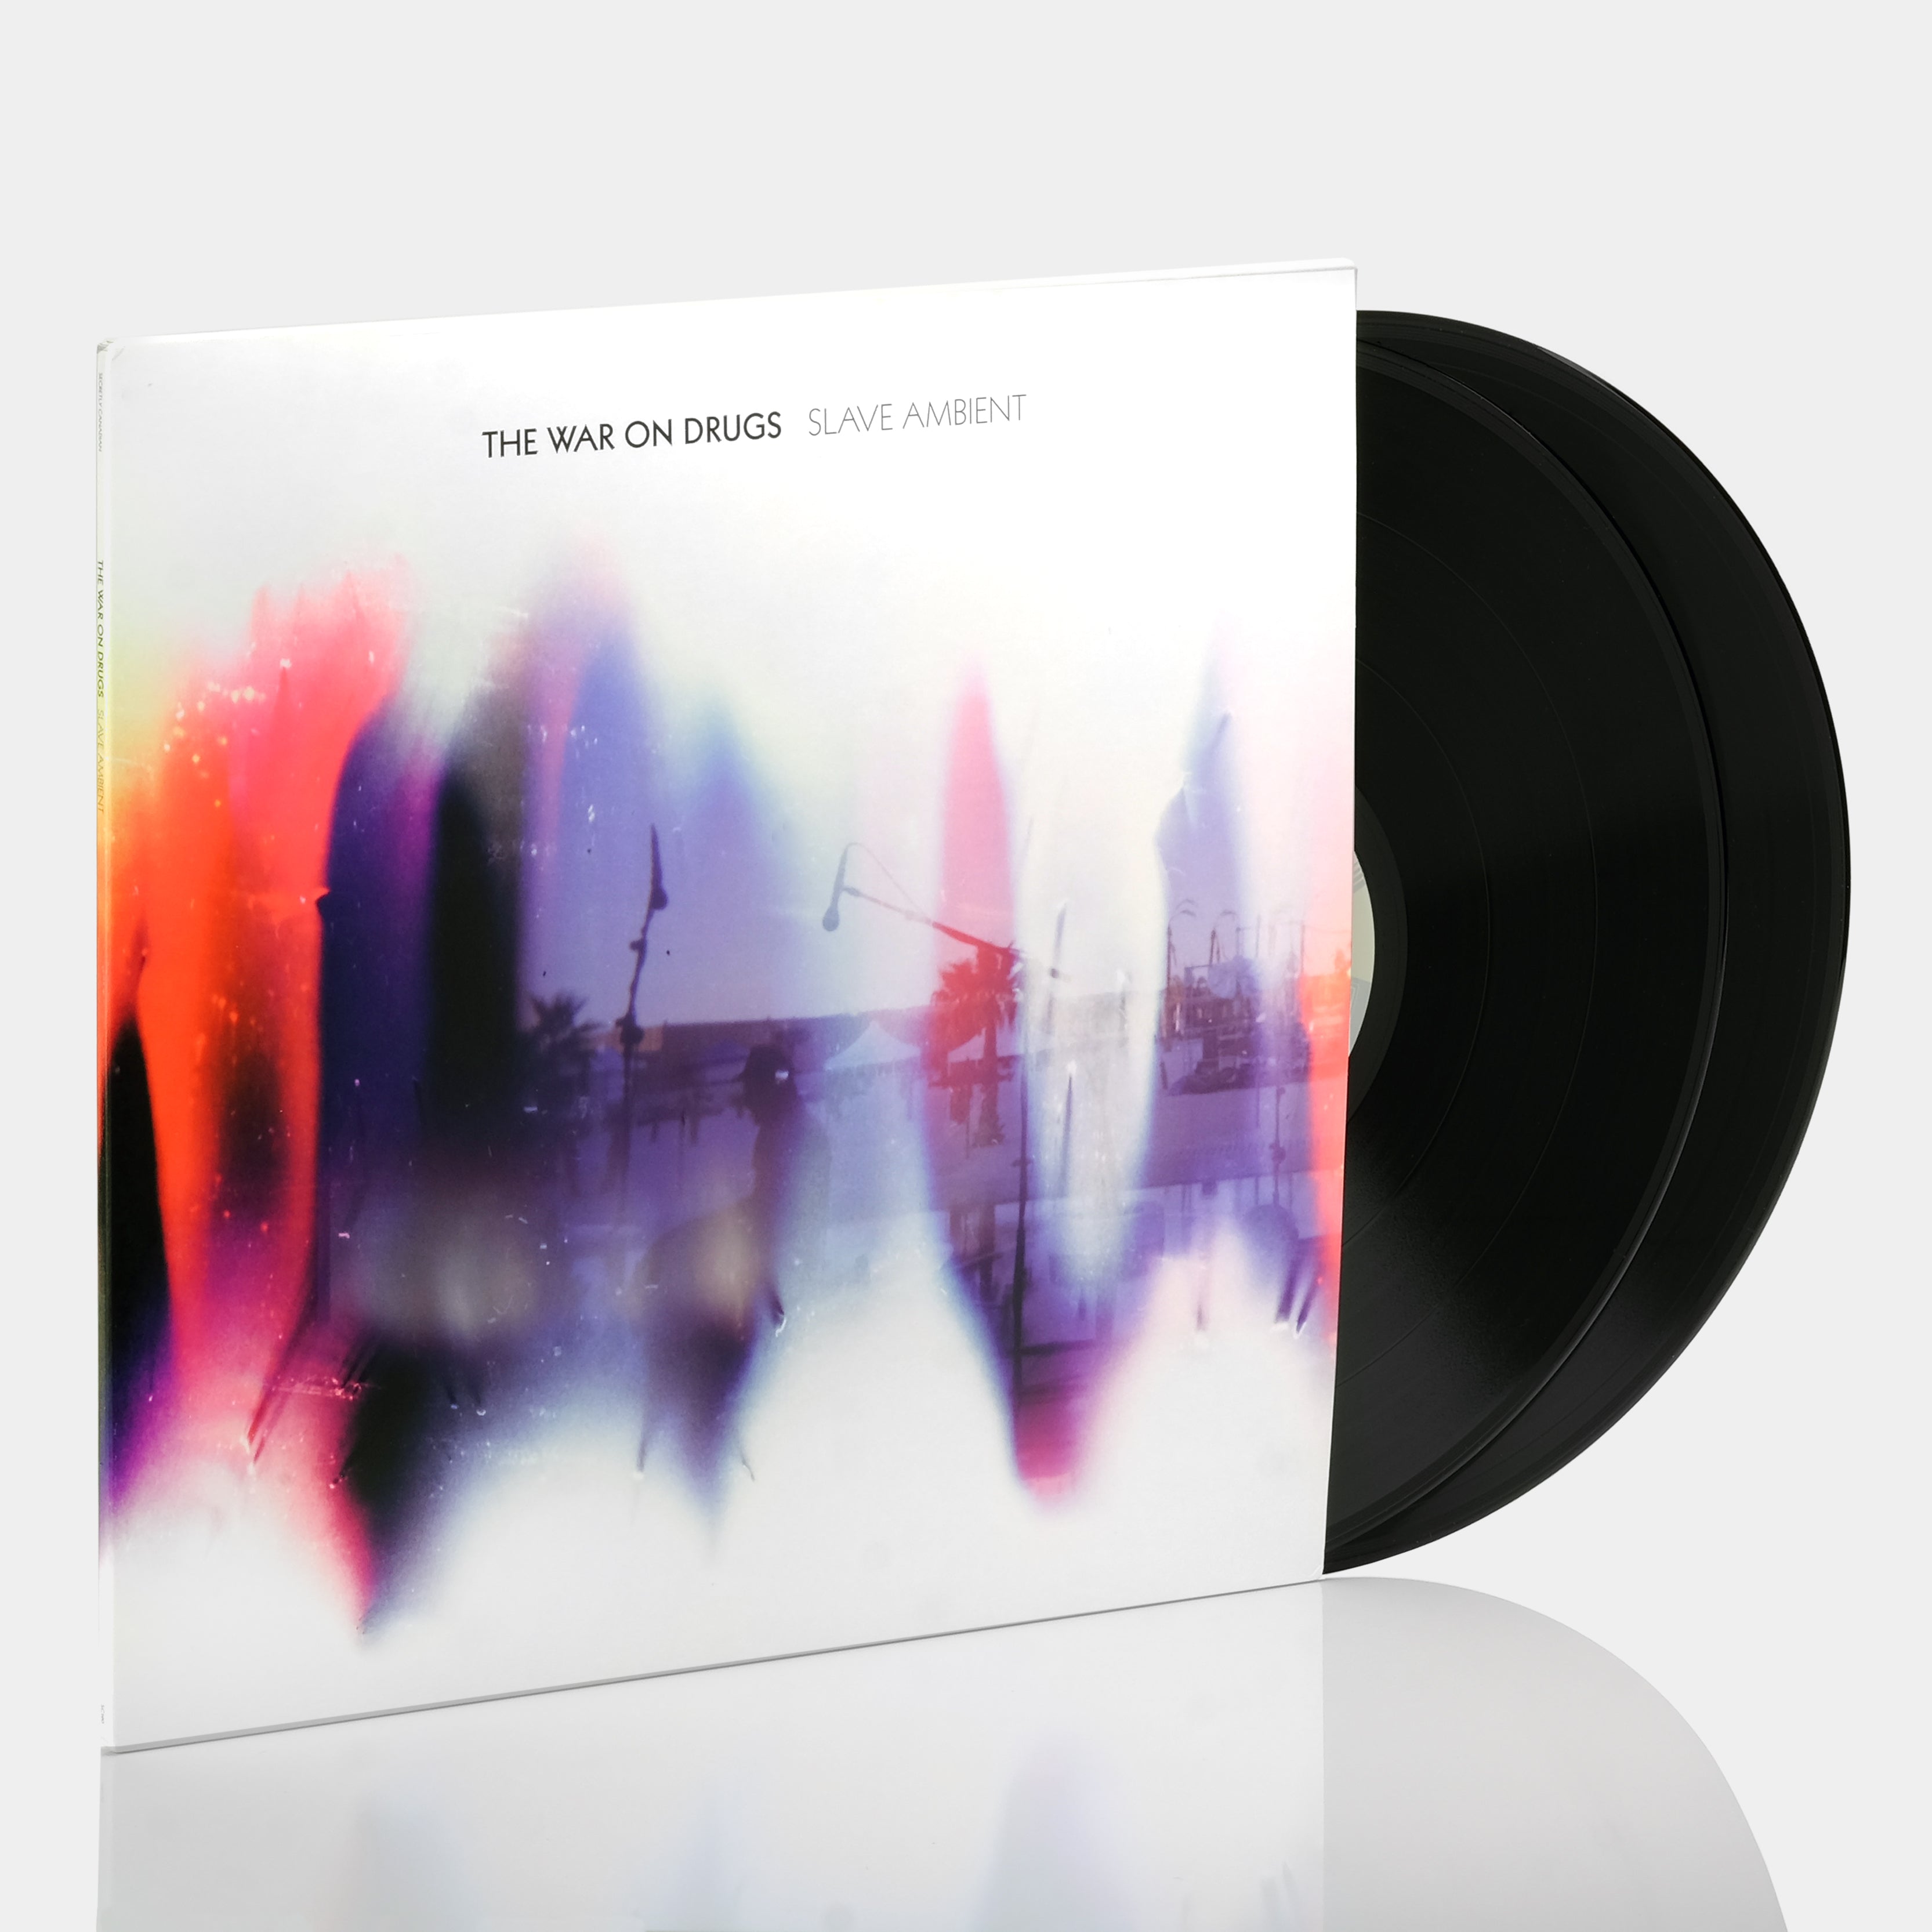 The War On Drugs - Slave Ambient 2xLP Vinyl Record